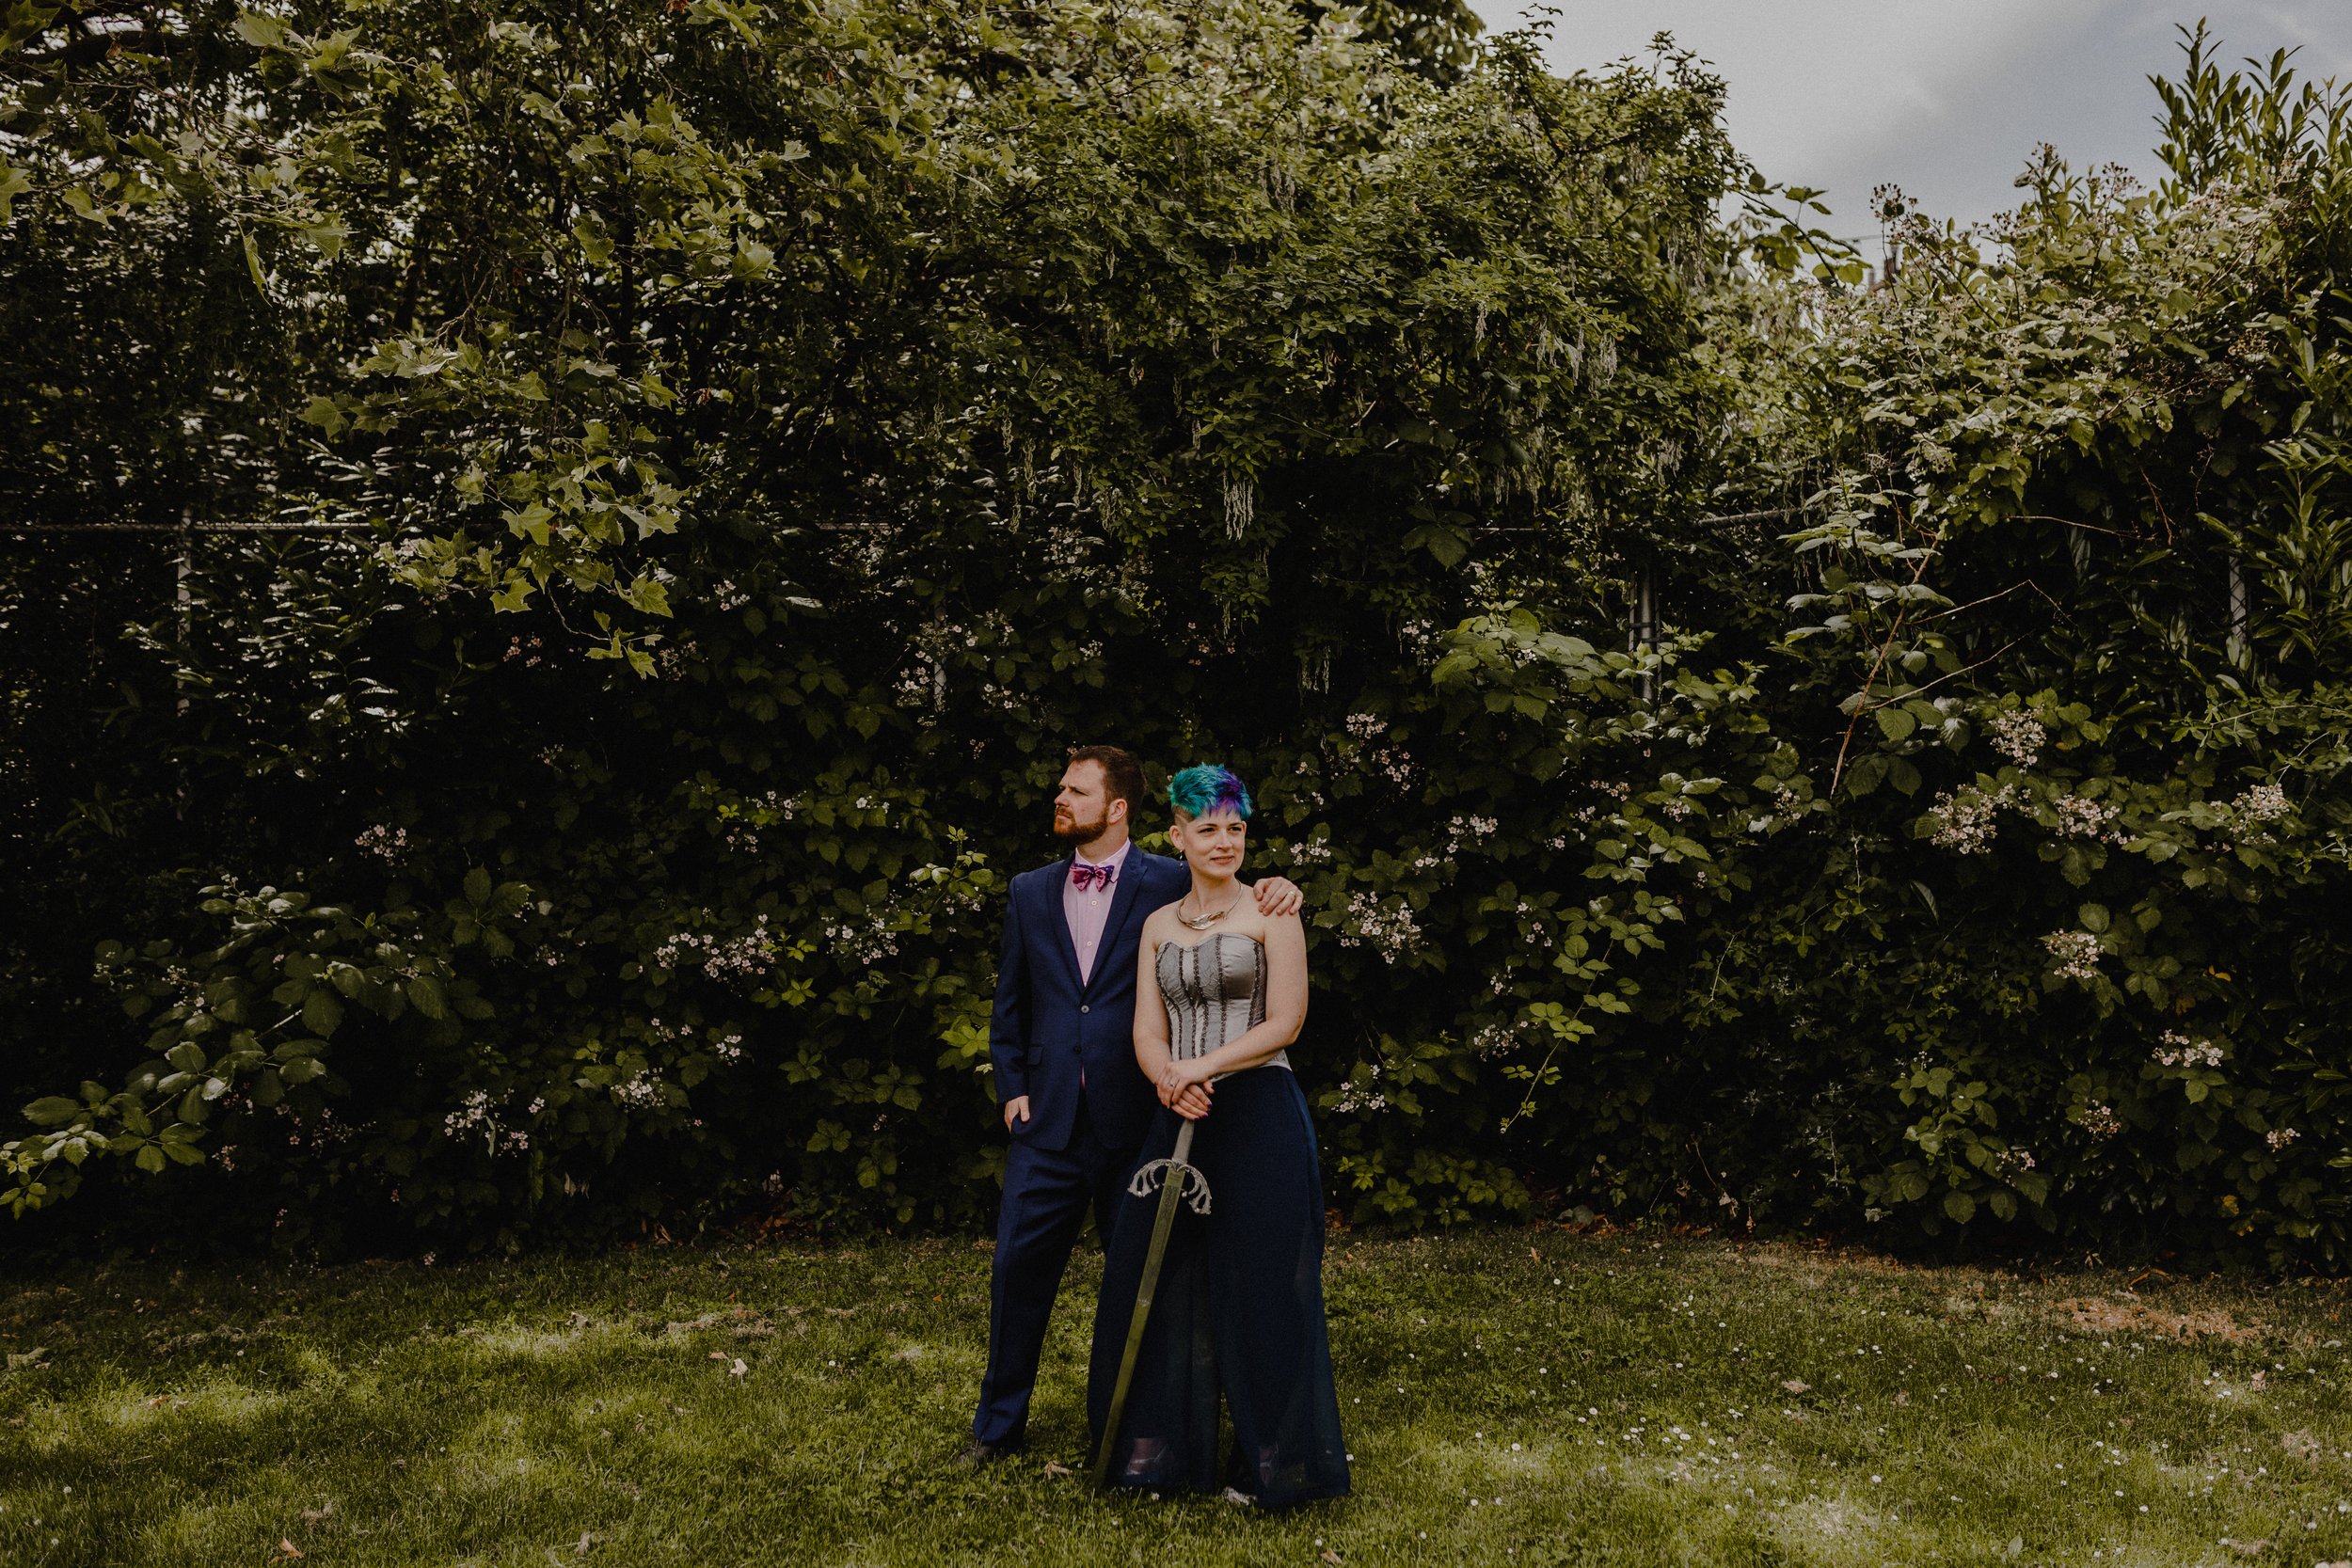  A groom and his future spouse are posed together in front of some lush greenery. The person on the right holds a sword pointed toward the ground. 